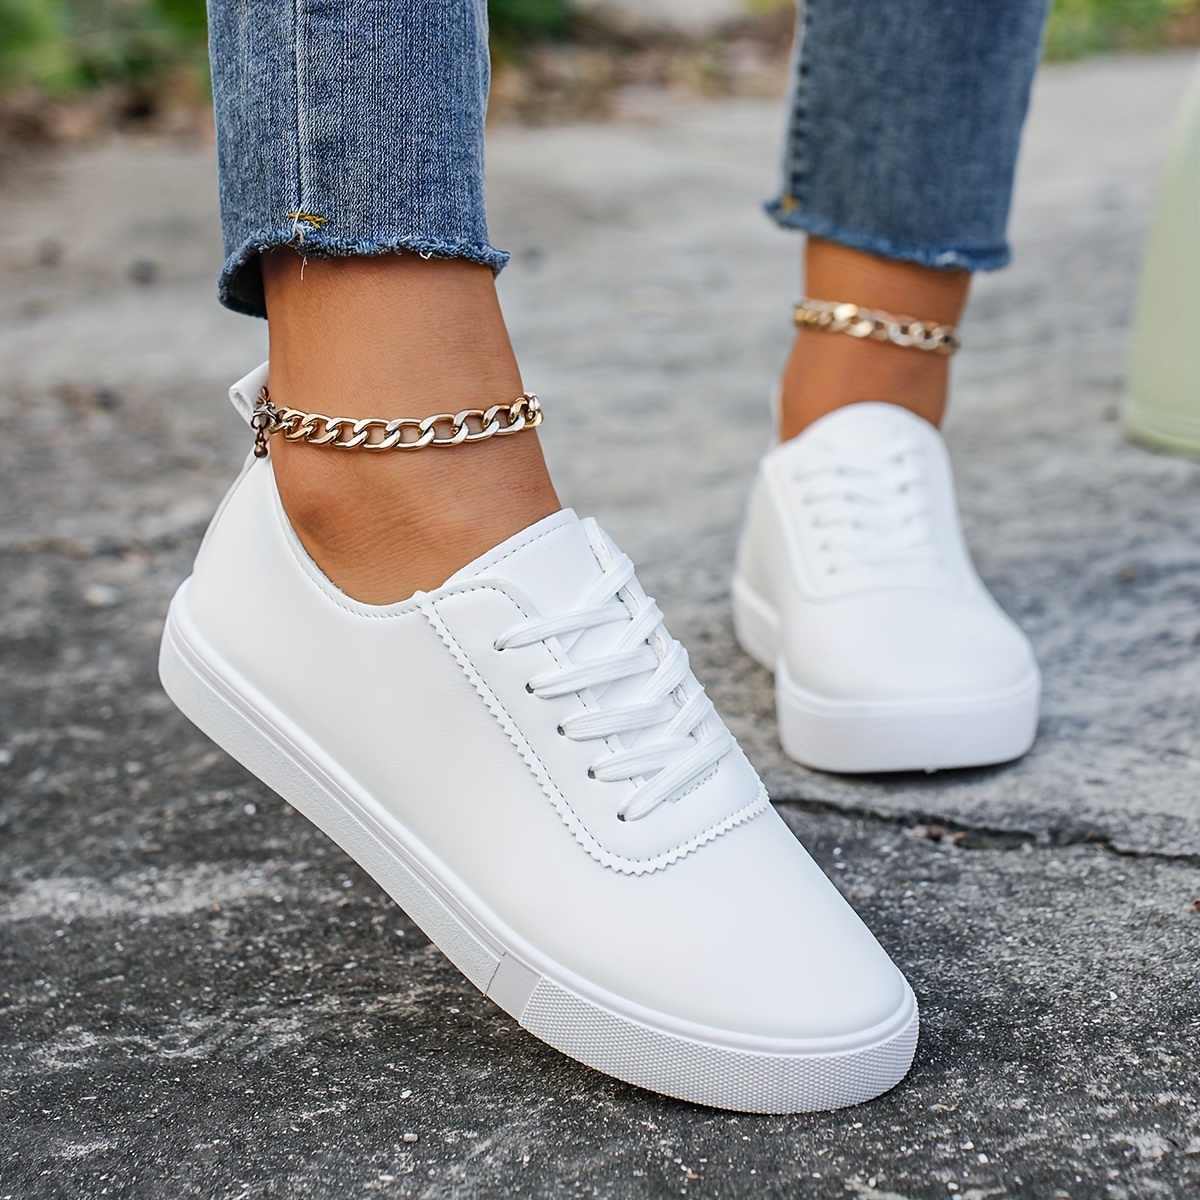 

Women's Minimalist Solid Color Sneakers, Lace Up Low-top Round Toe Lightweight Non-slip Shoes, Comfy Classic White Shoes